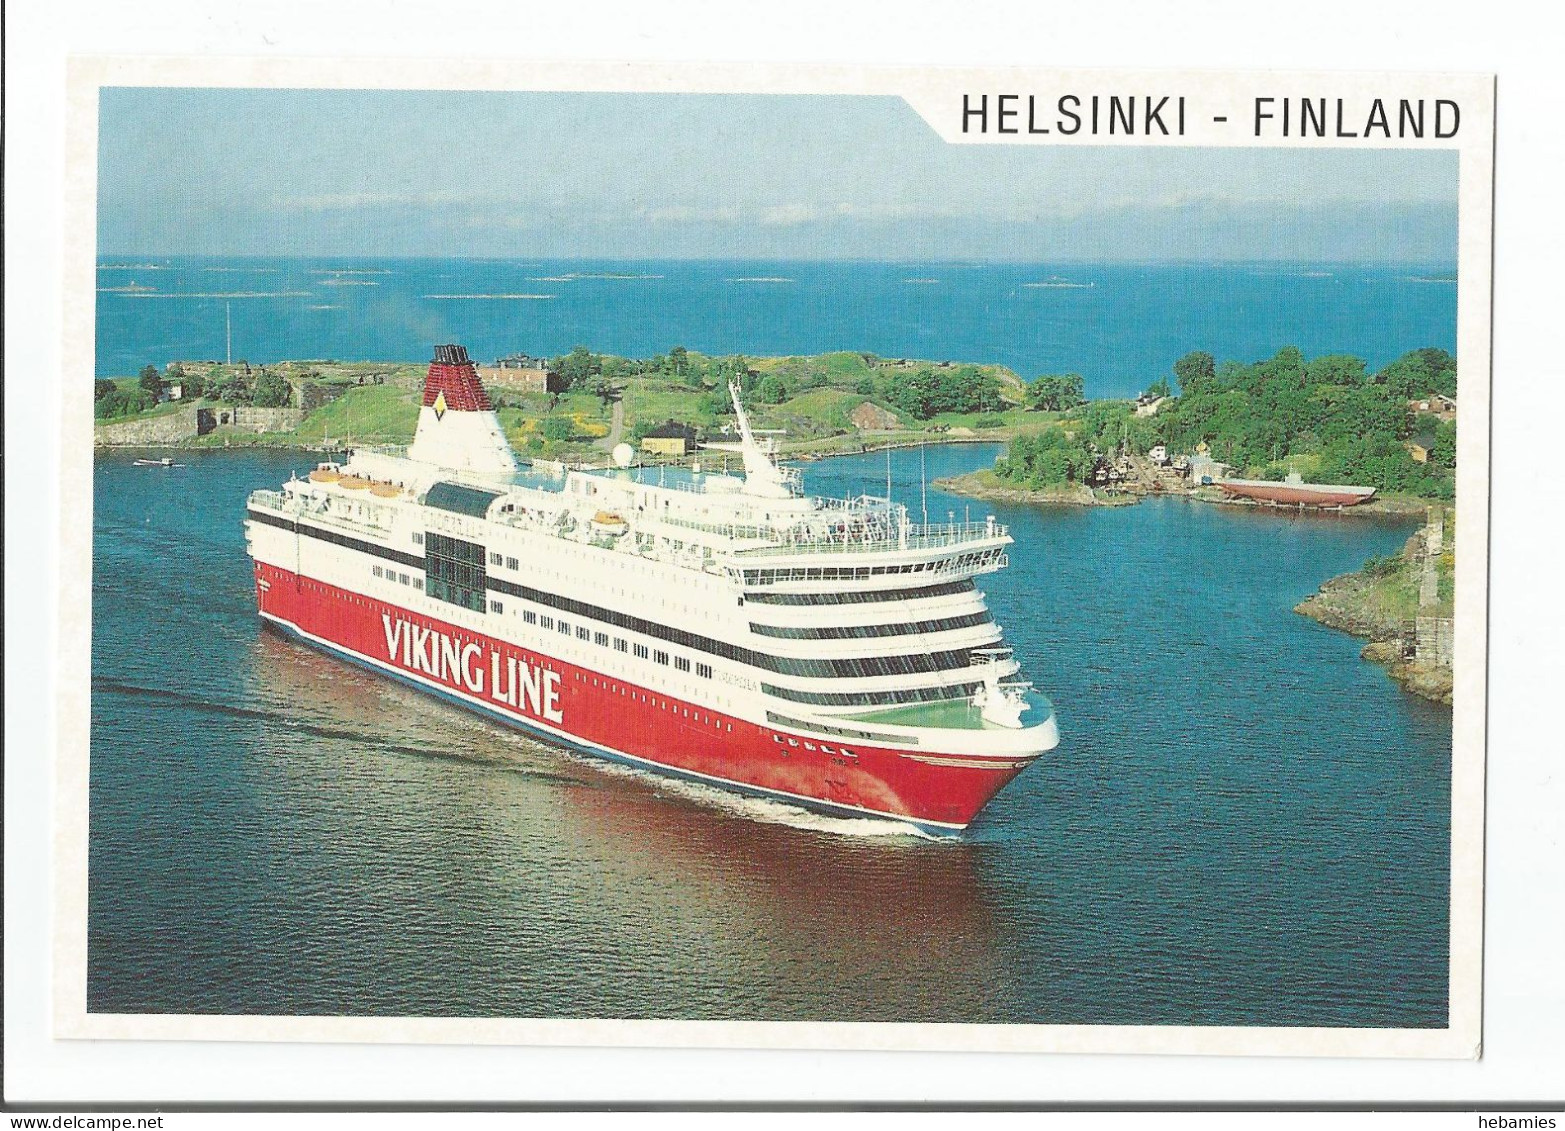 Cruise Liner M/S CINDERELLA  - Passing Helsinki Sea Fortress Suomenlinna  - VIKING LINE Shipping Company - Ferries